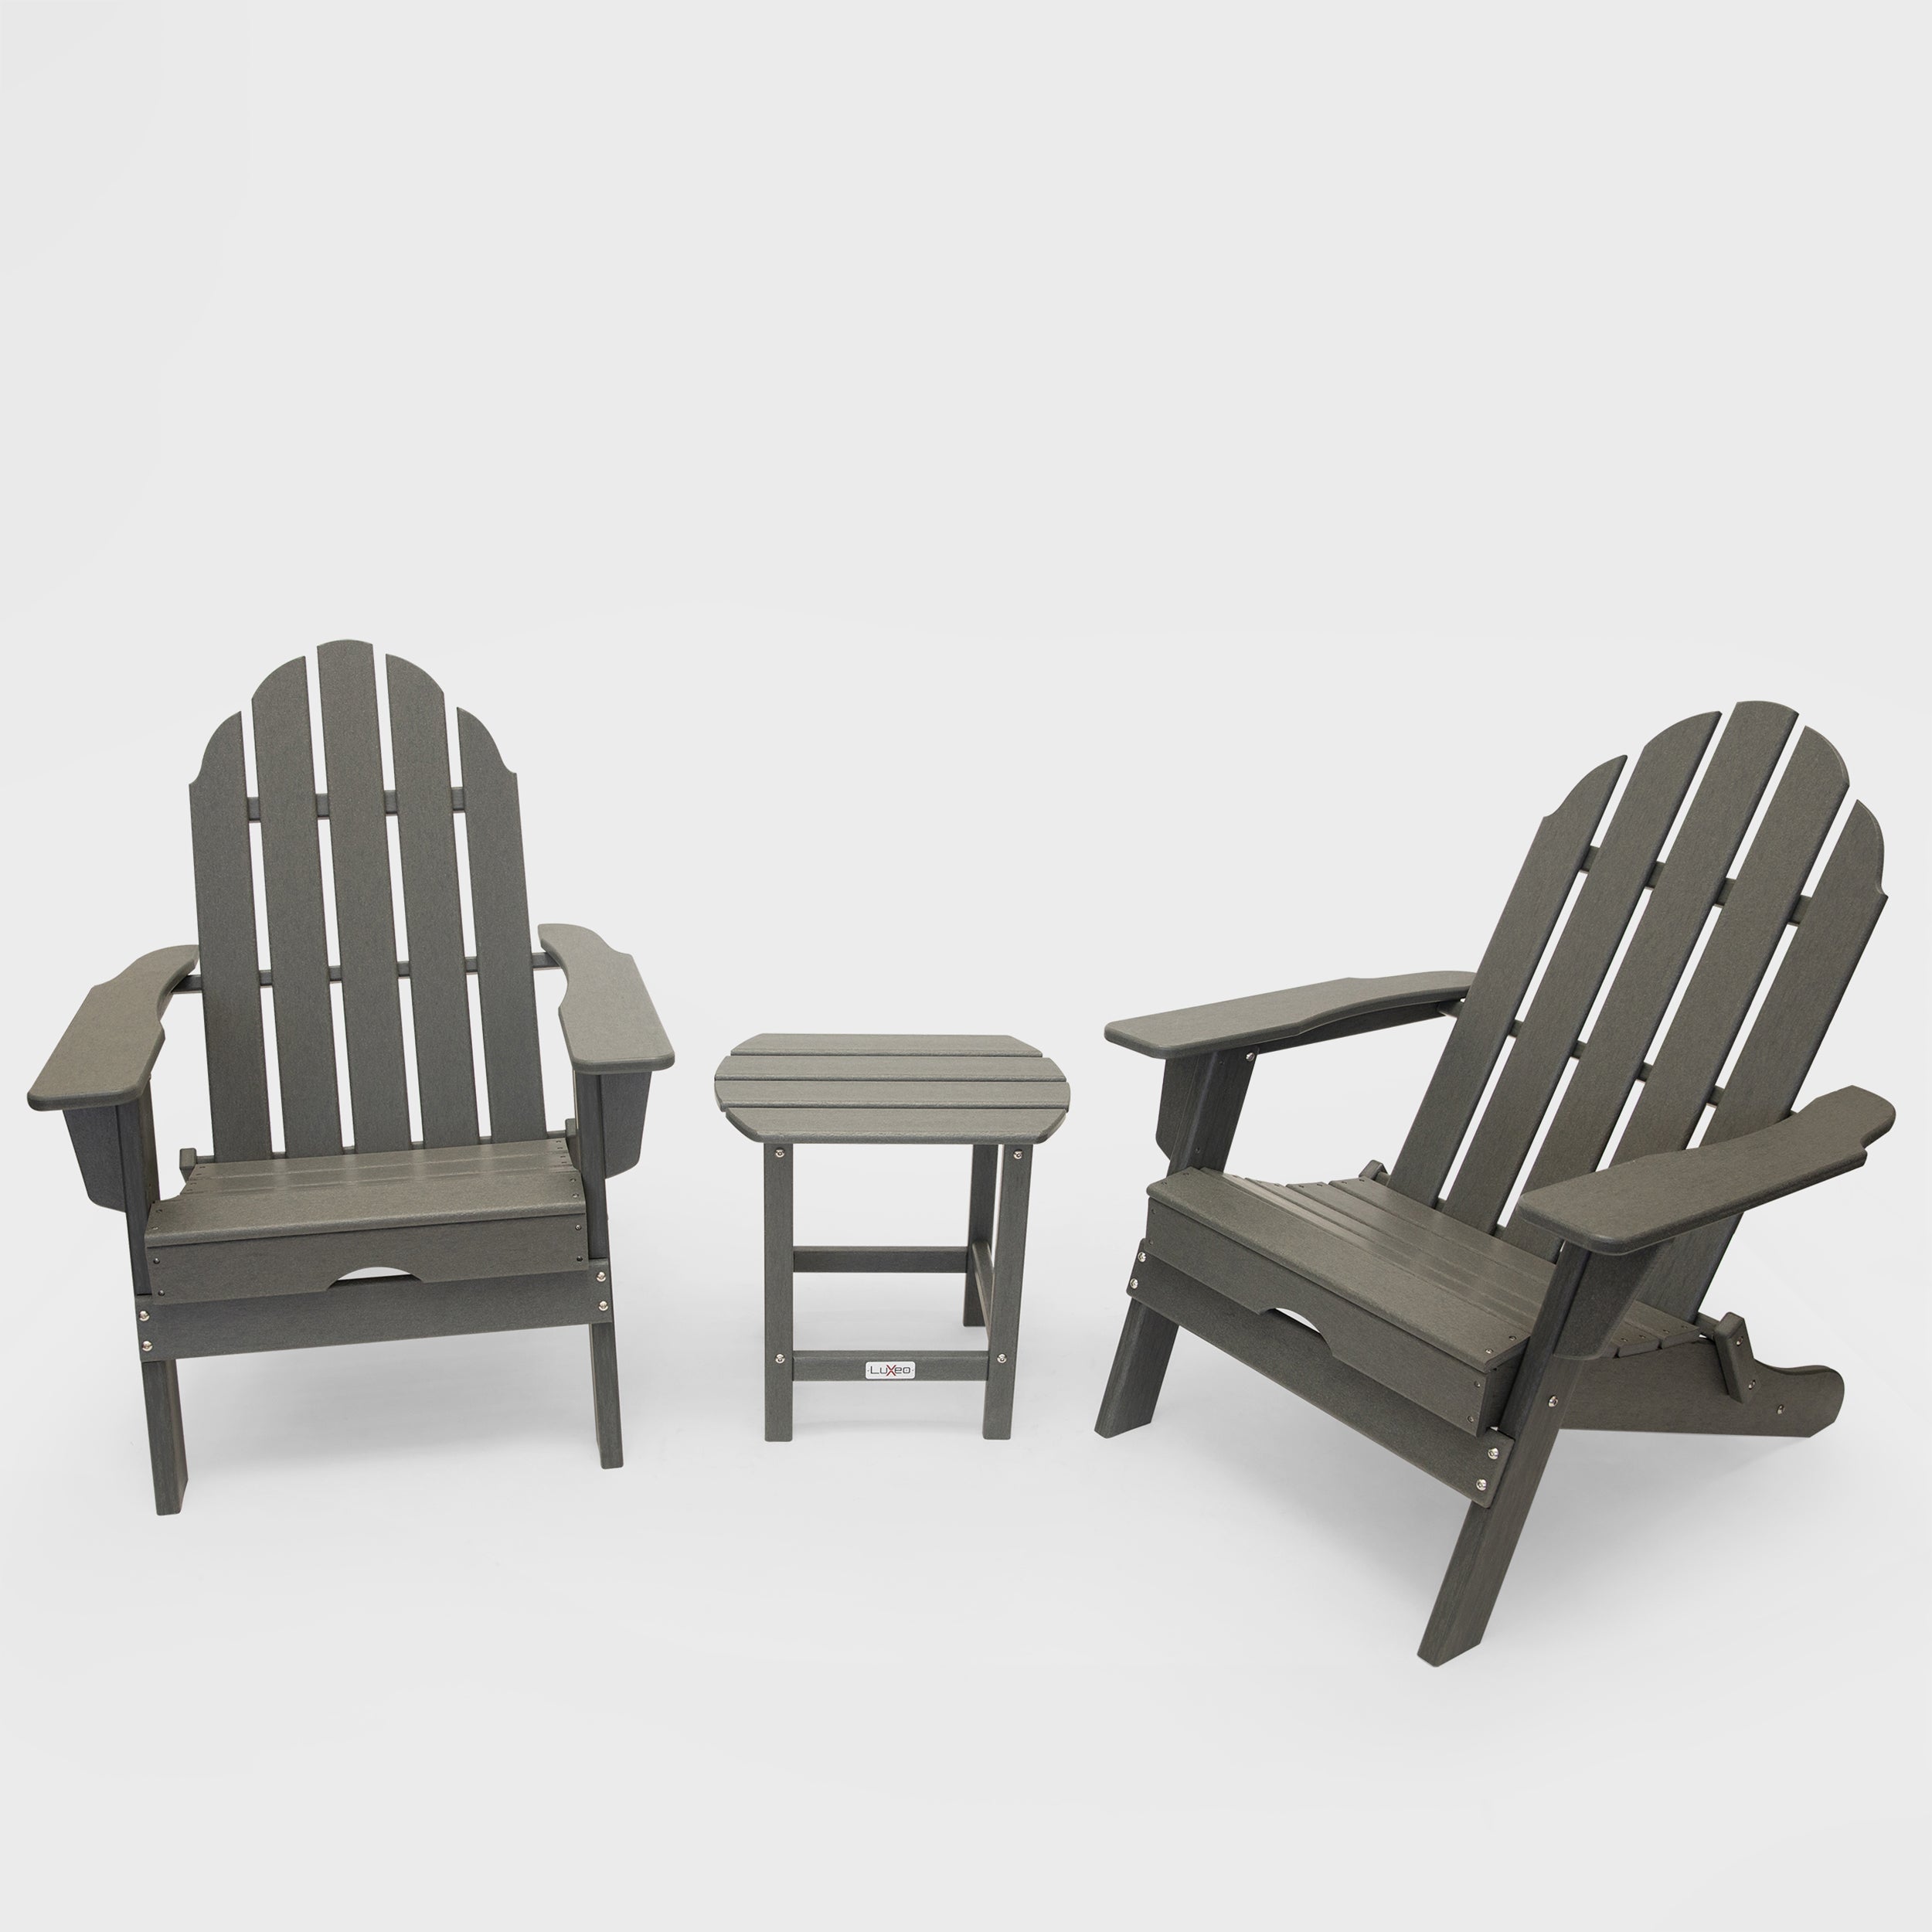 Balboa HDPE Recycled Plastic Folding Adirondack Chair and Table Set (3-Piece)